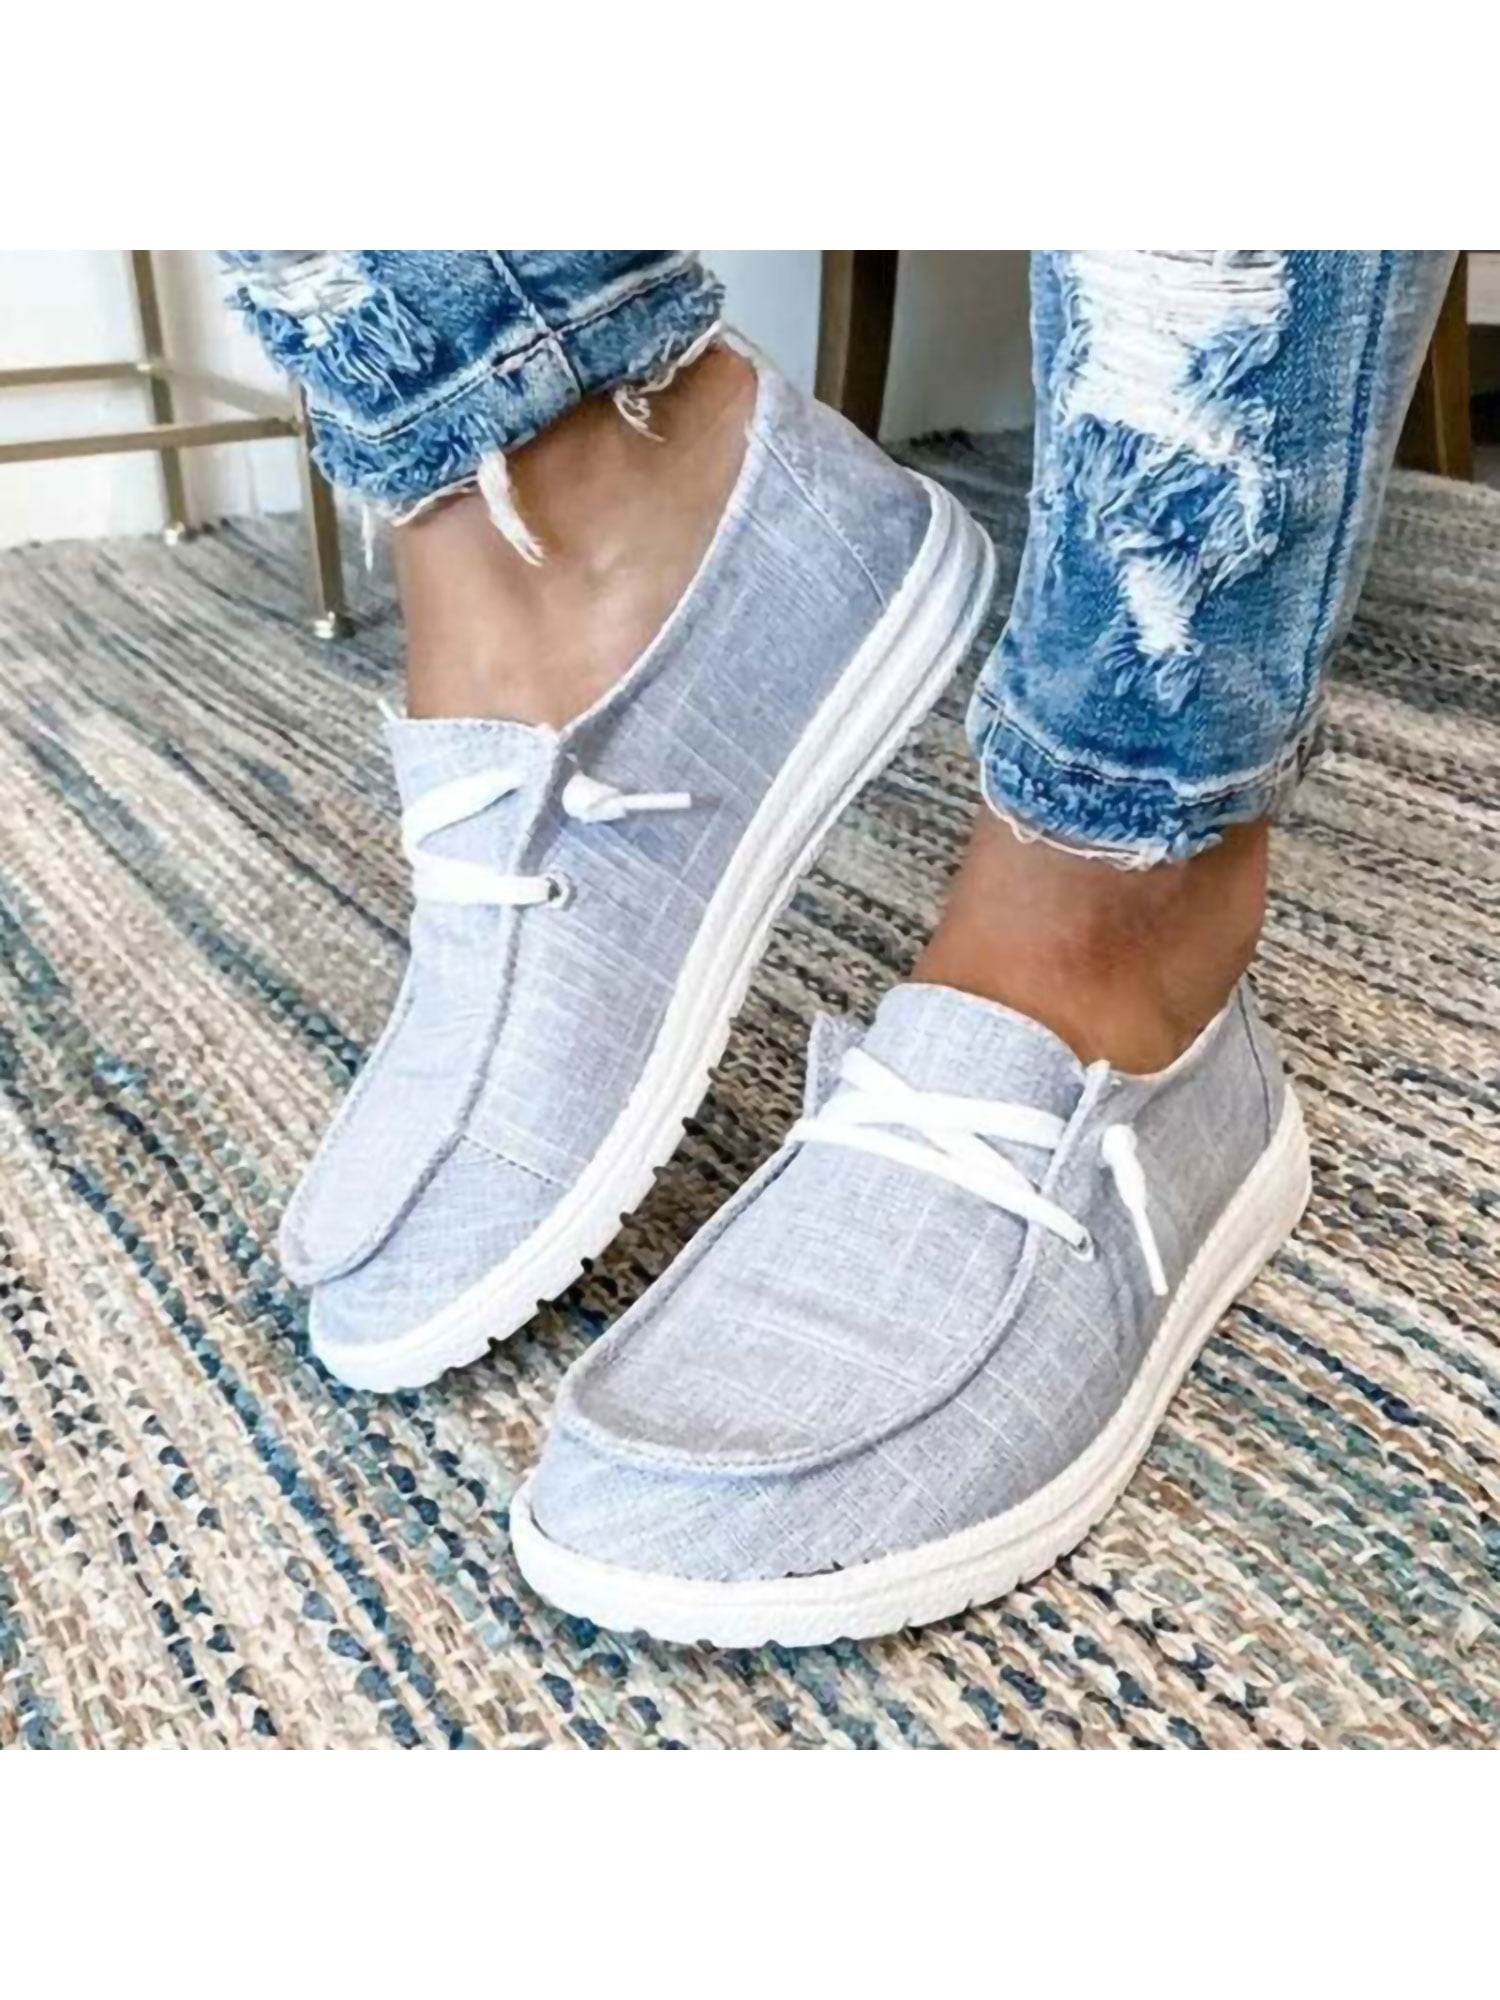 Fashion Womens Ladies Casual Comfy Slip On Flat Shoes Pumps Trainer Loafers Size 